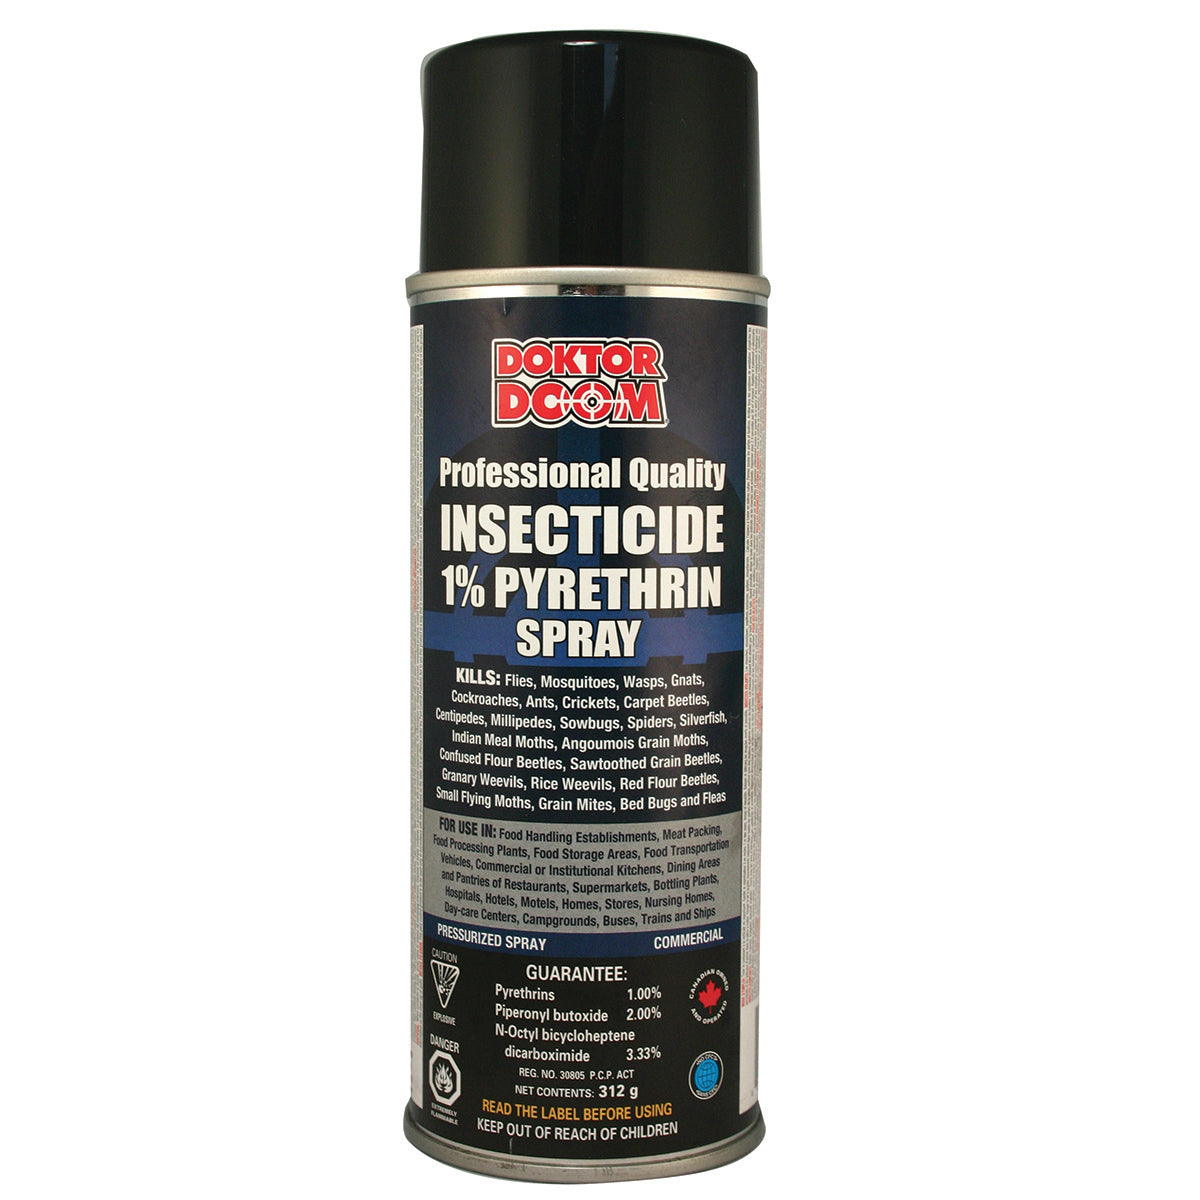 Pro Quality Insecticide 1% Pyrethrins